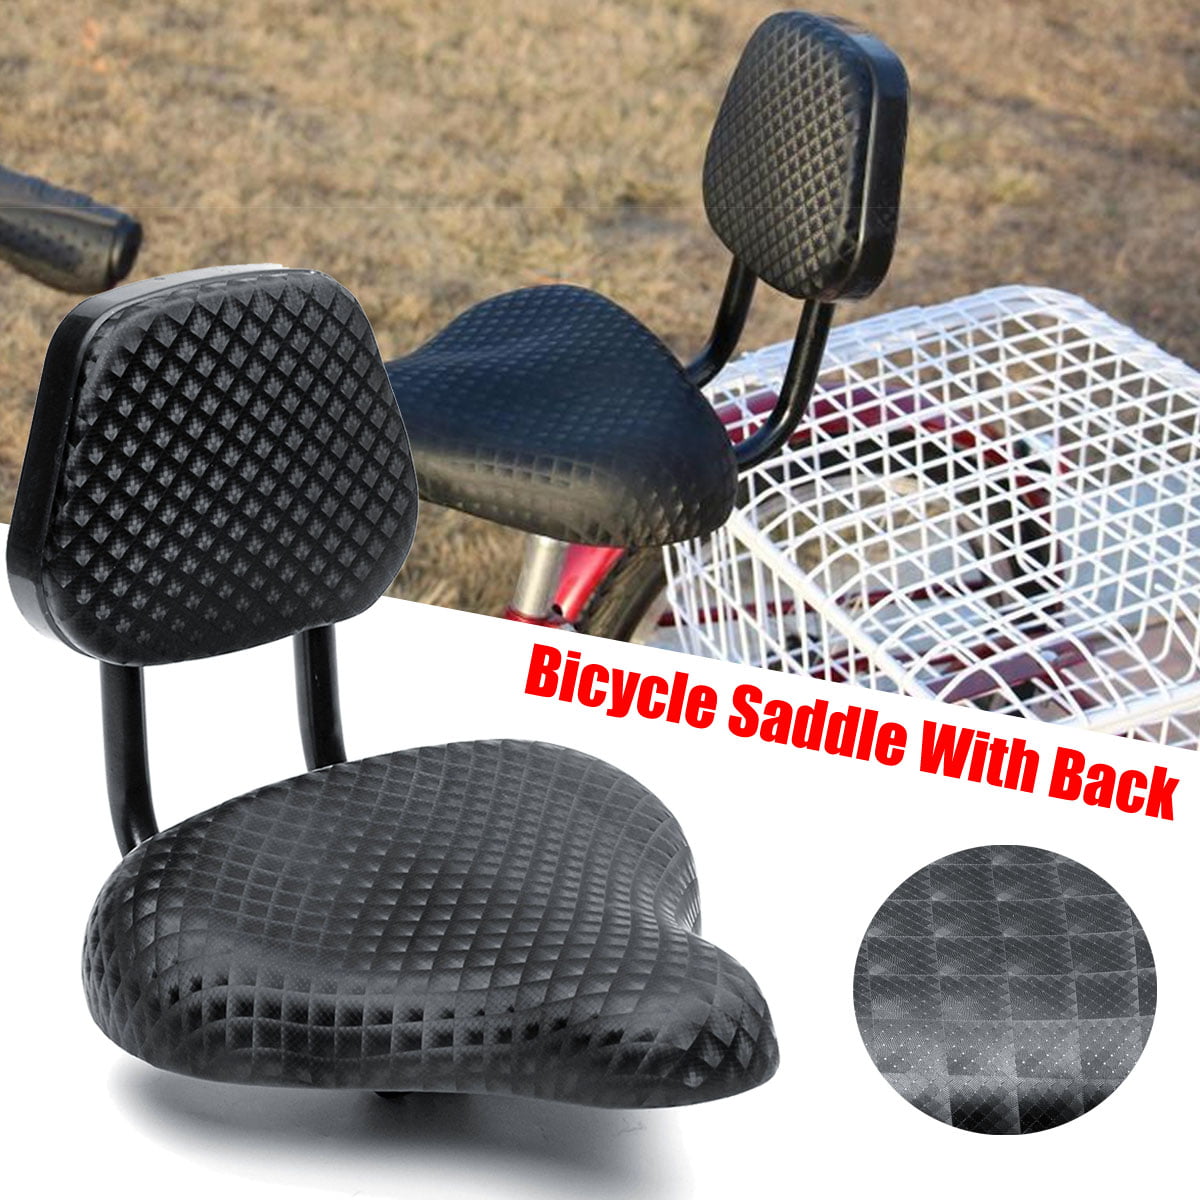 Wide Comfort Cruiser Tricycle Bike Bicycle Saddle Seat Pad W/ Back Rest Black 